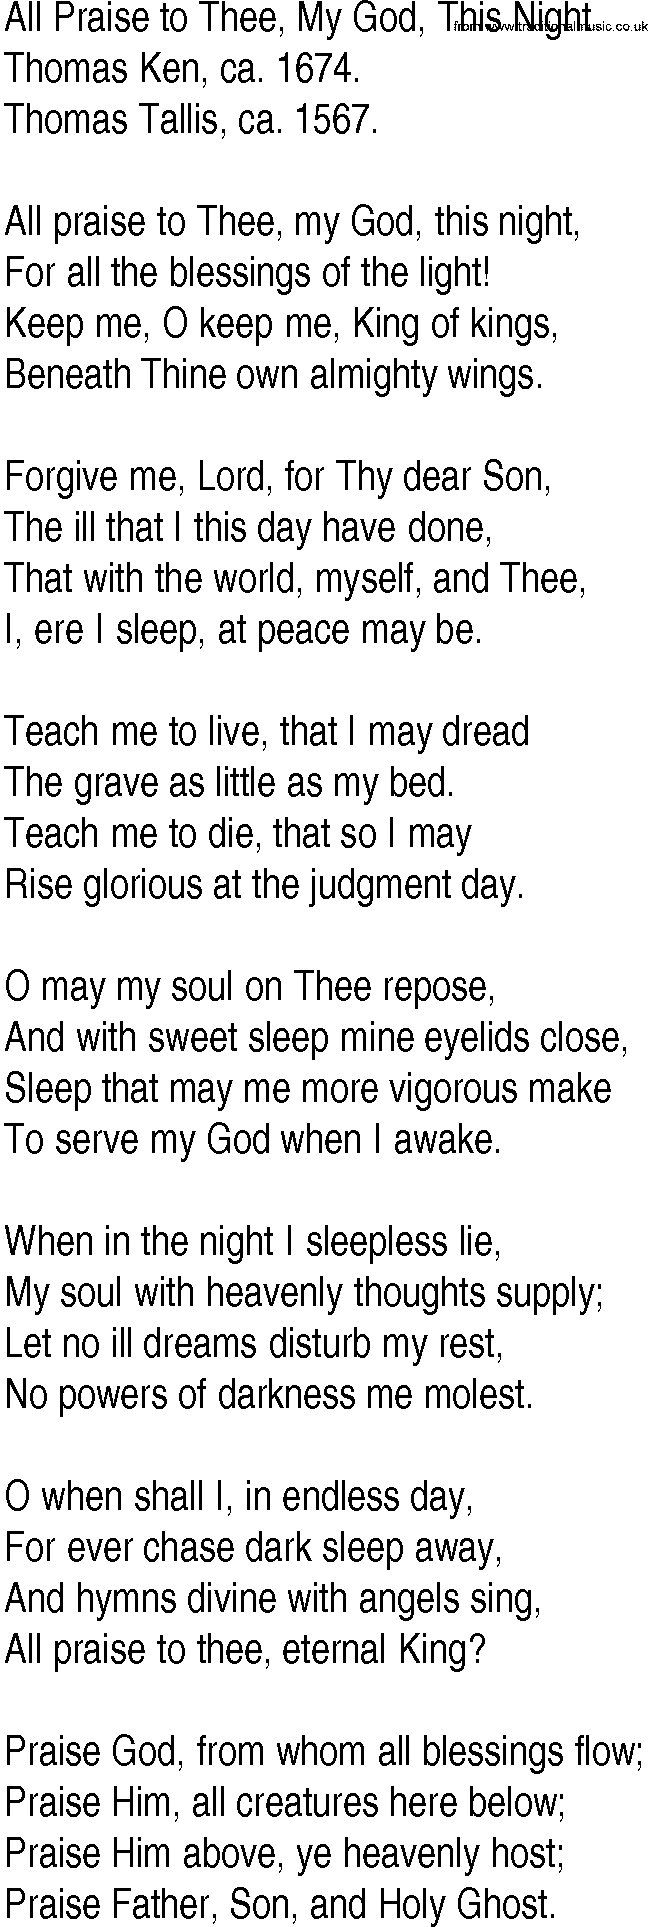 Hymn and Gospel Song: All Praise to Thee, My God, This Night by Thomas Ken ca lyrics